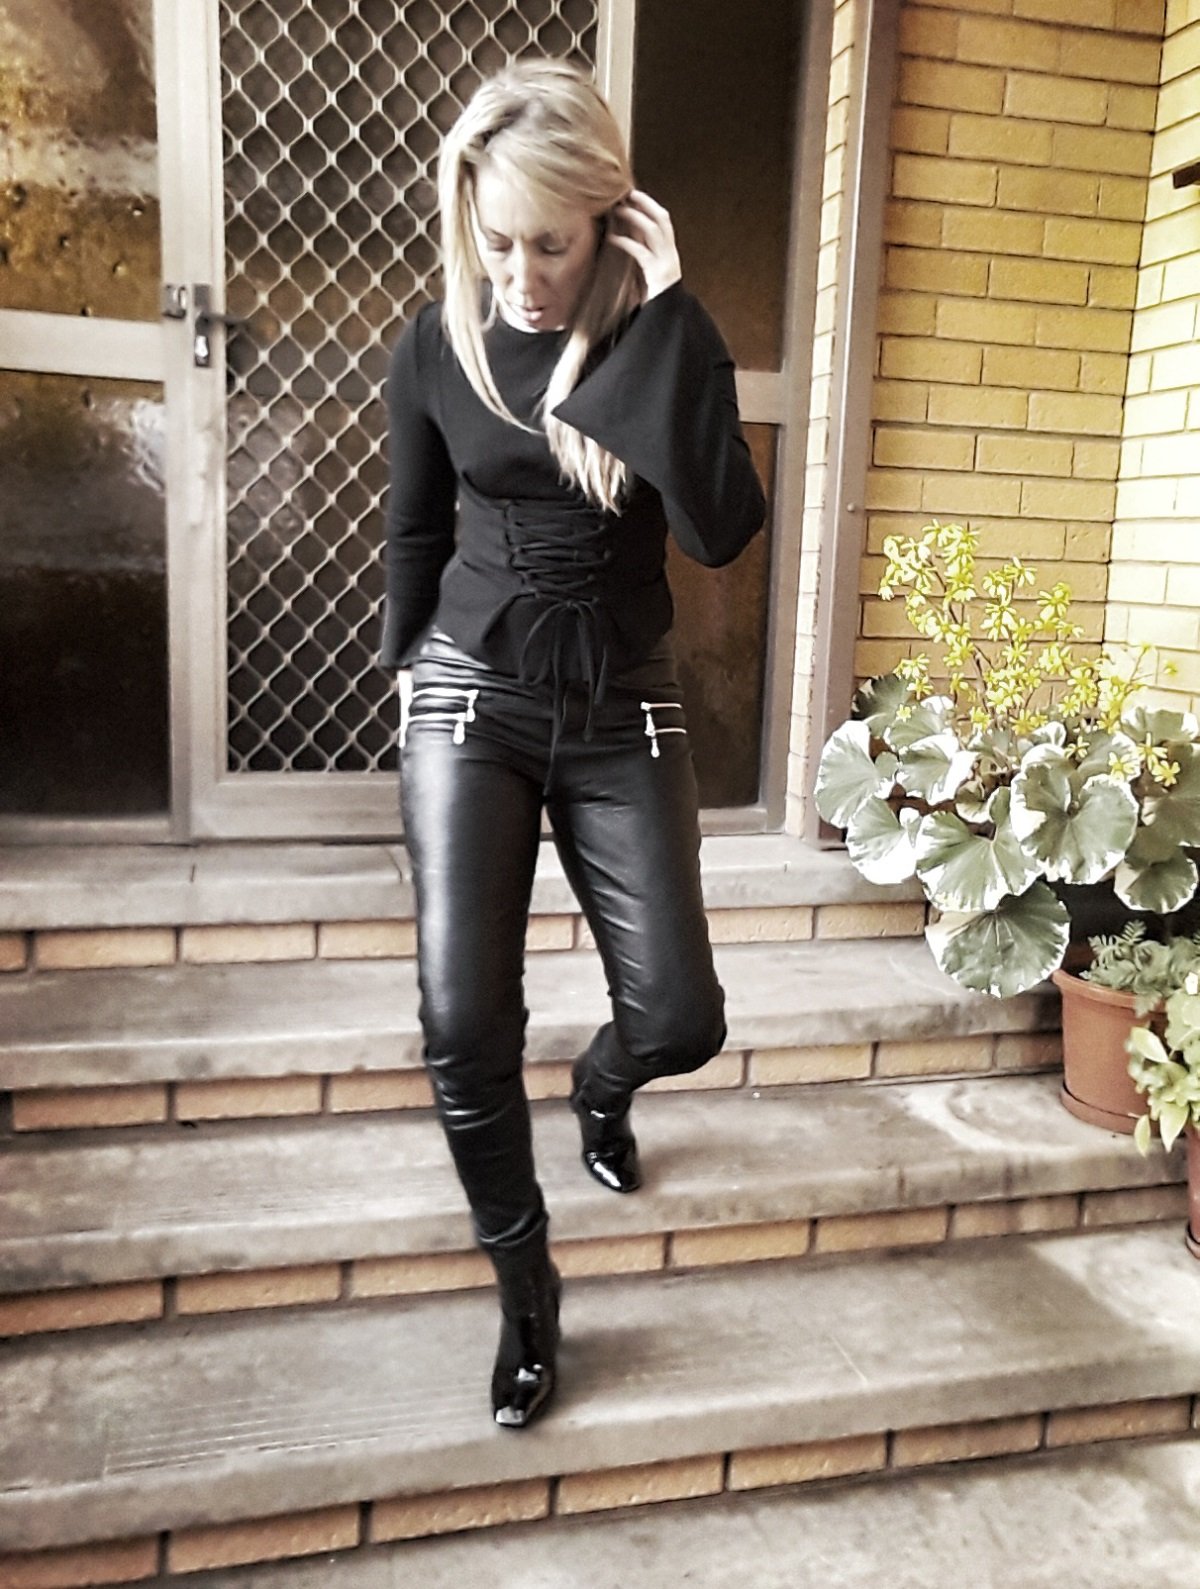 LEATHER & BLACK - Style & Life by Susana